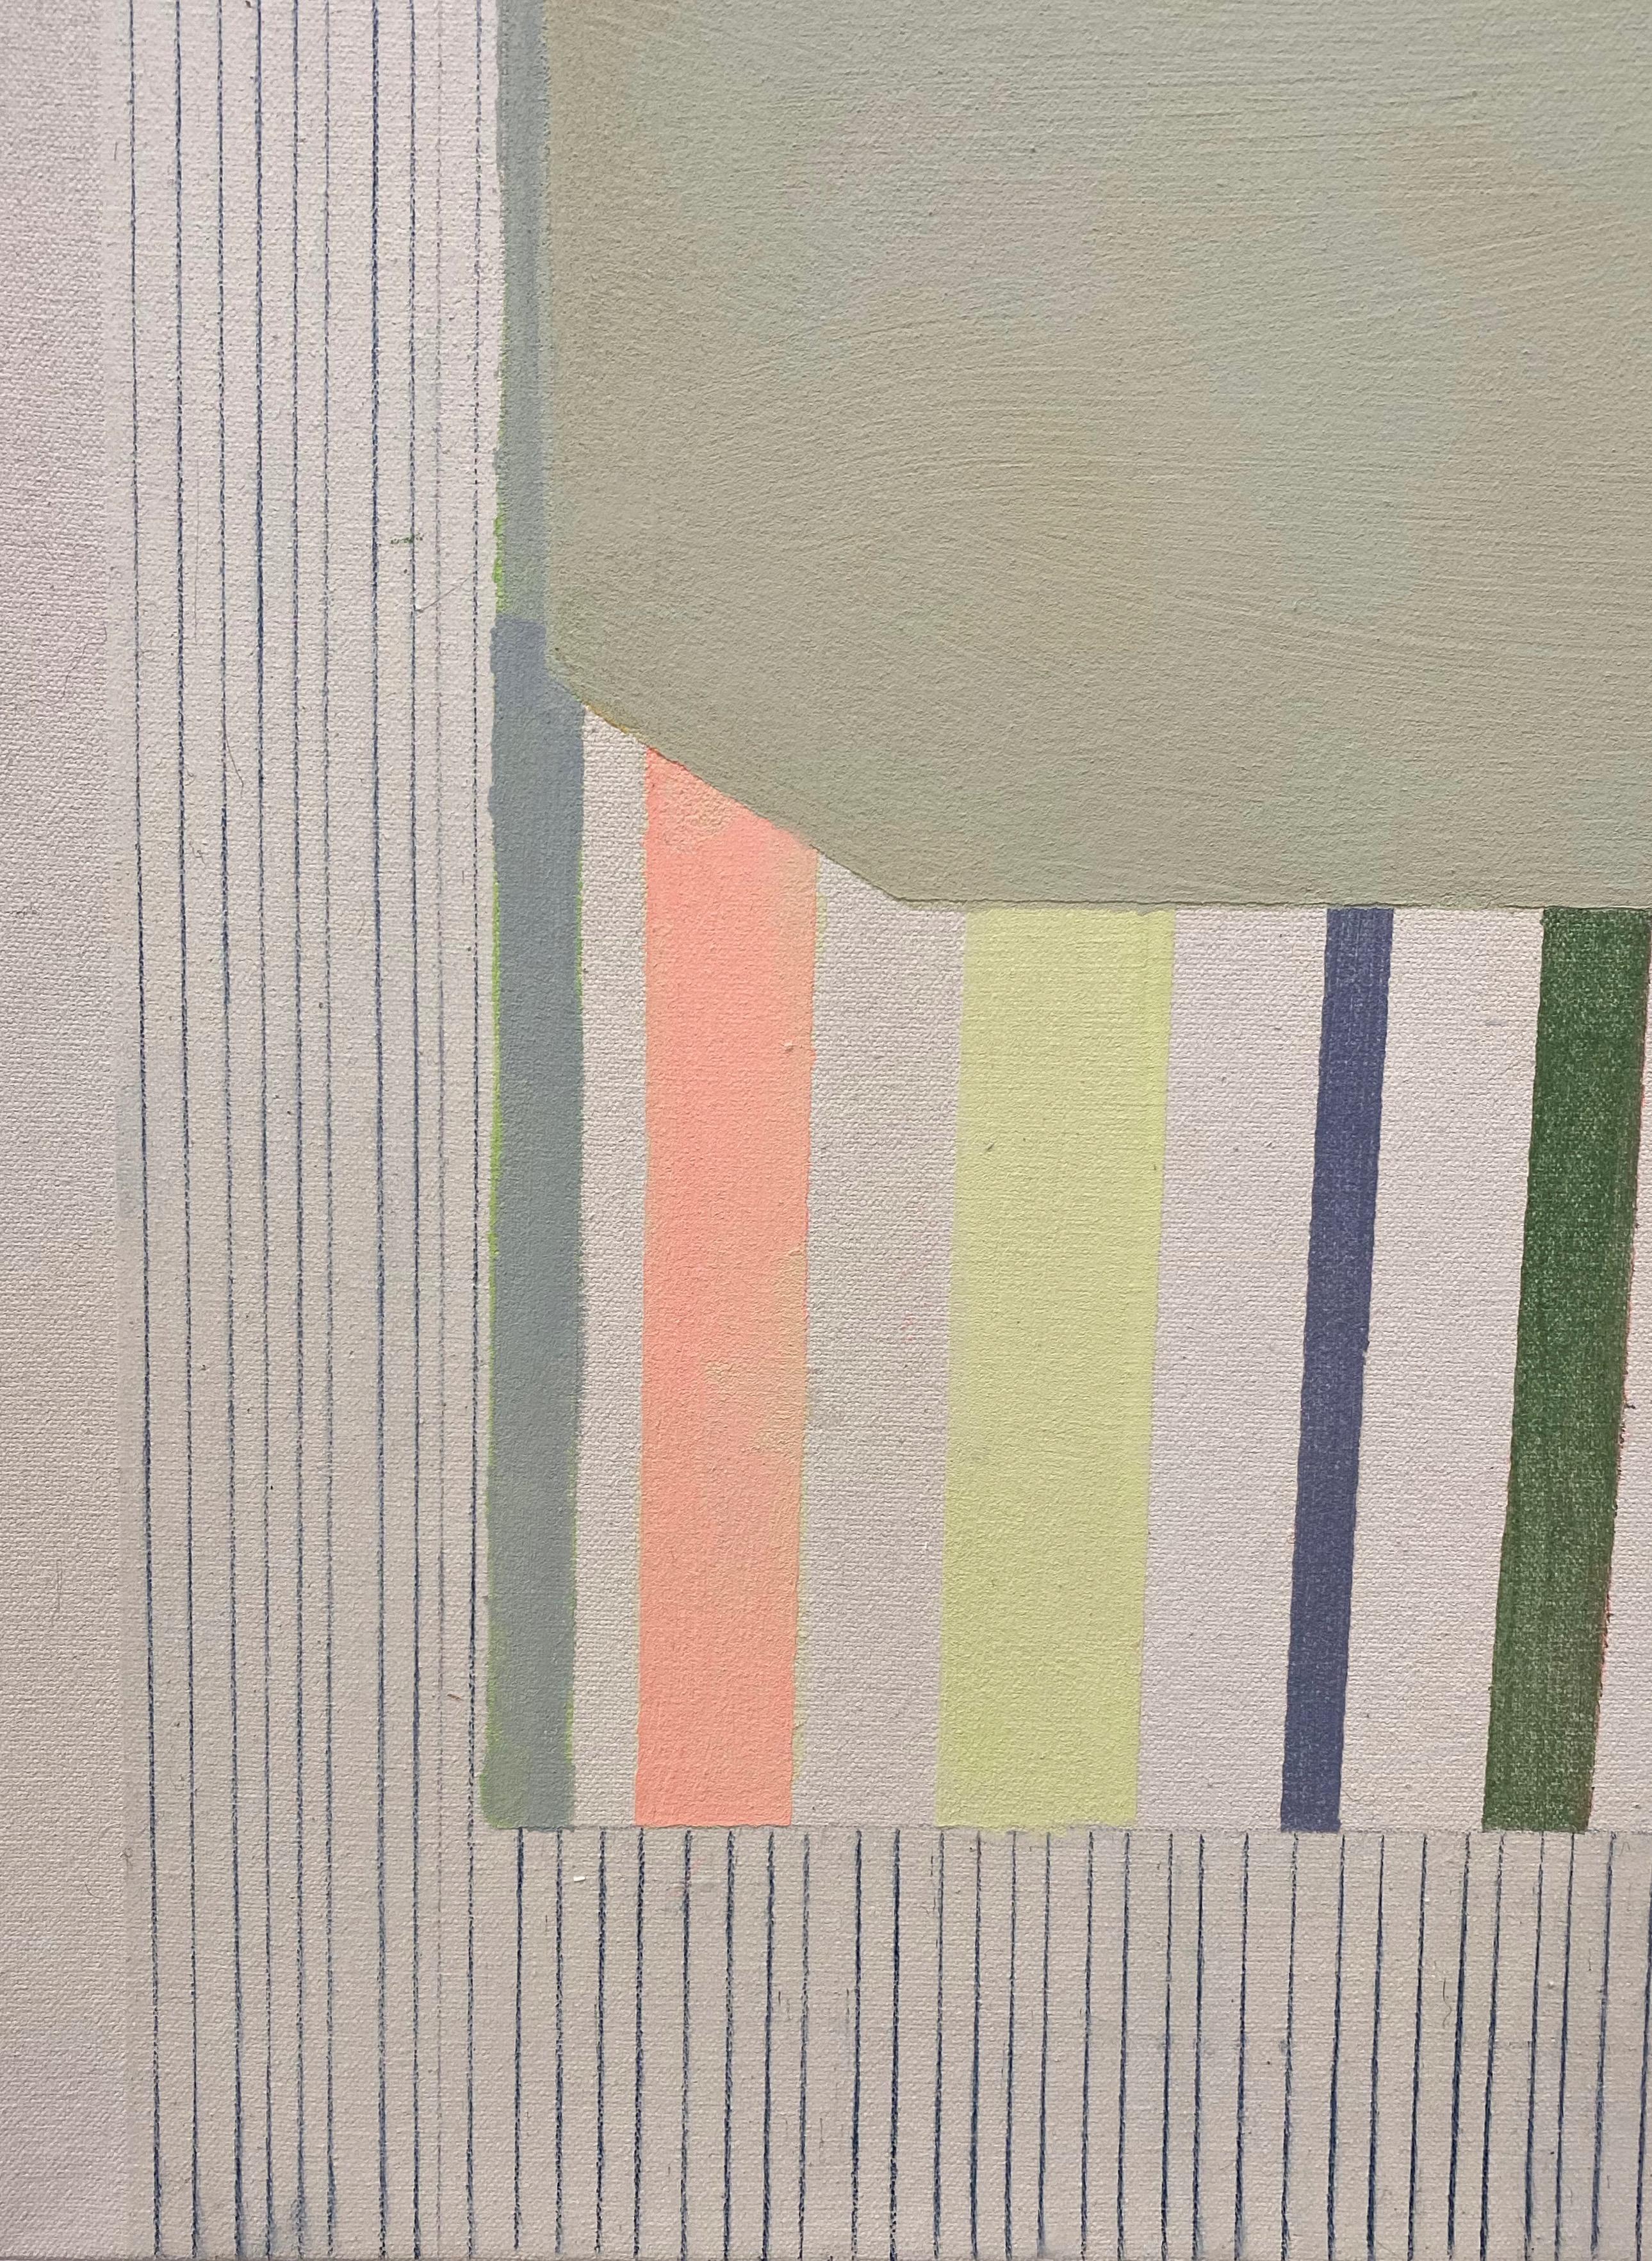 Clean and precise, carefully ordered stripes and blocks of color in light green, dark sage, yellow ochre, pale iemon yellow and burnt orange are lively and vibrant against the neutral beige background. Signed, dated and titled on verso.

Elizabeth